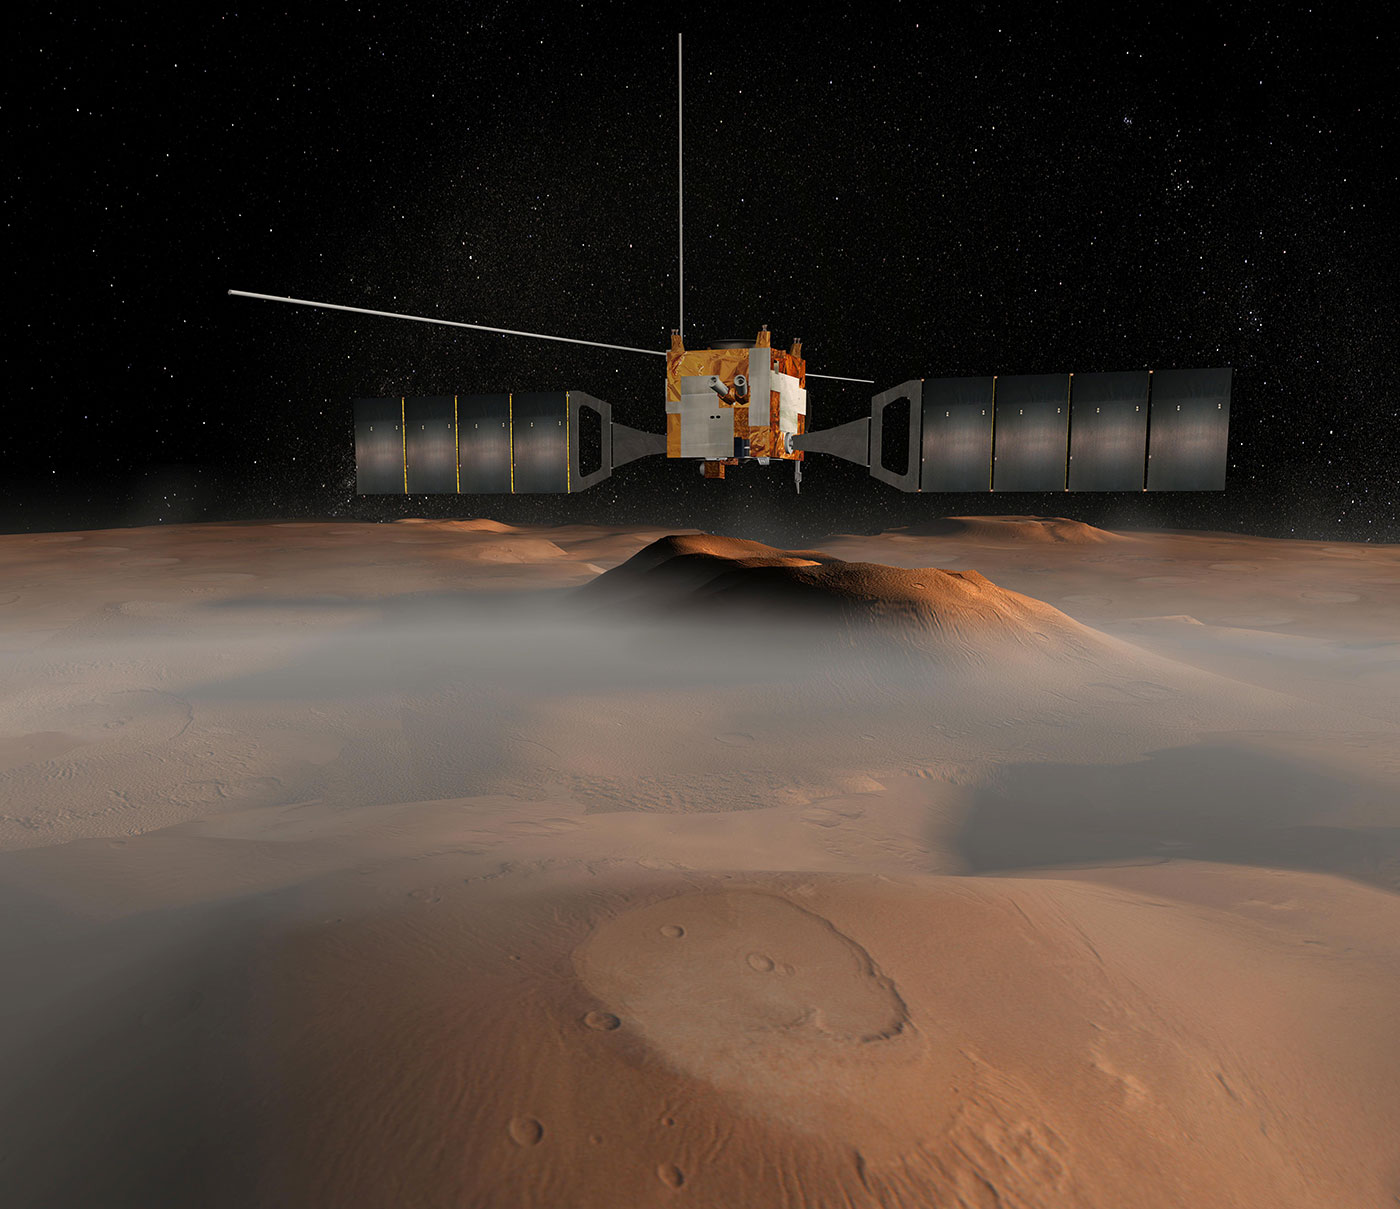 Study Looks More Closely at Mars' Underground Water Signals NASA’s